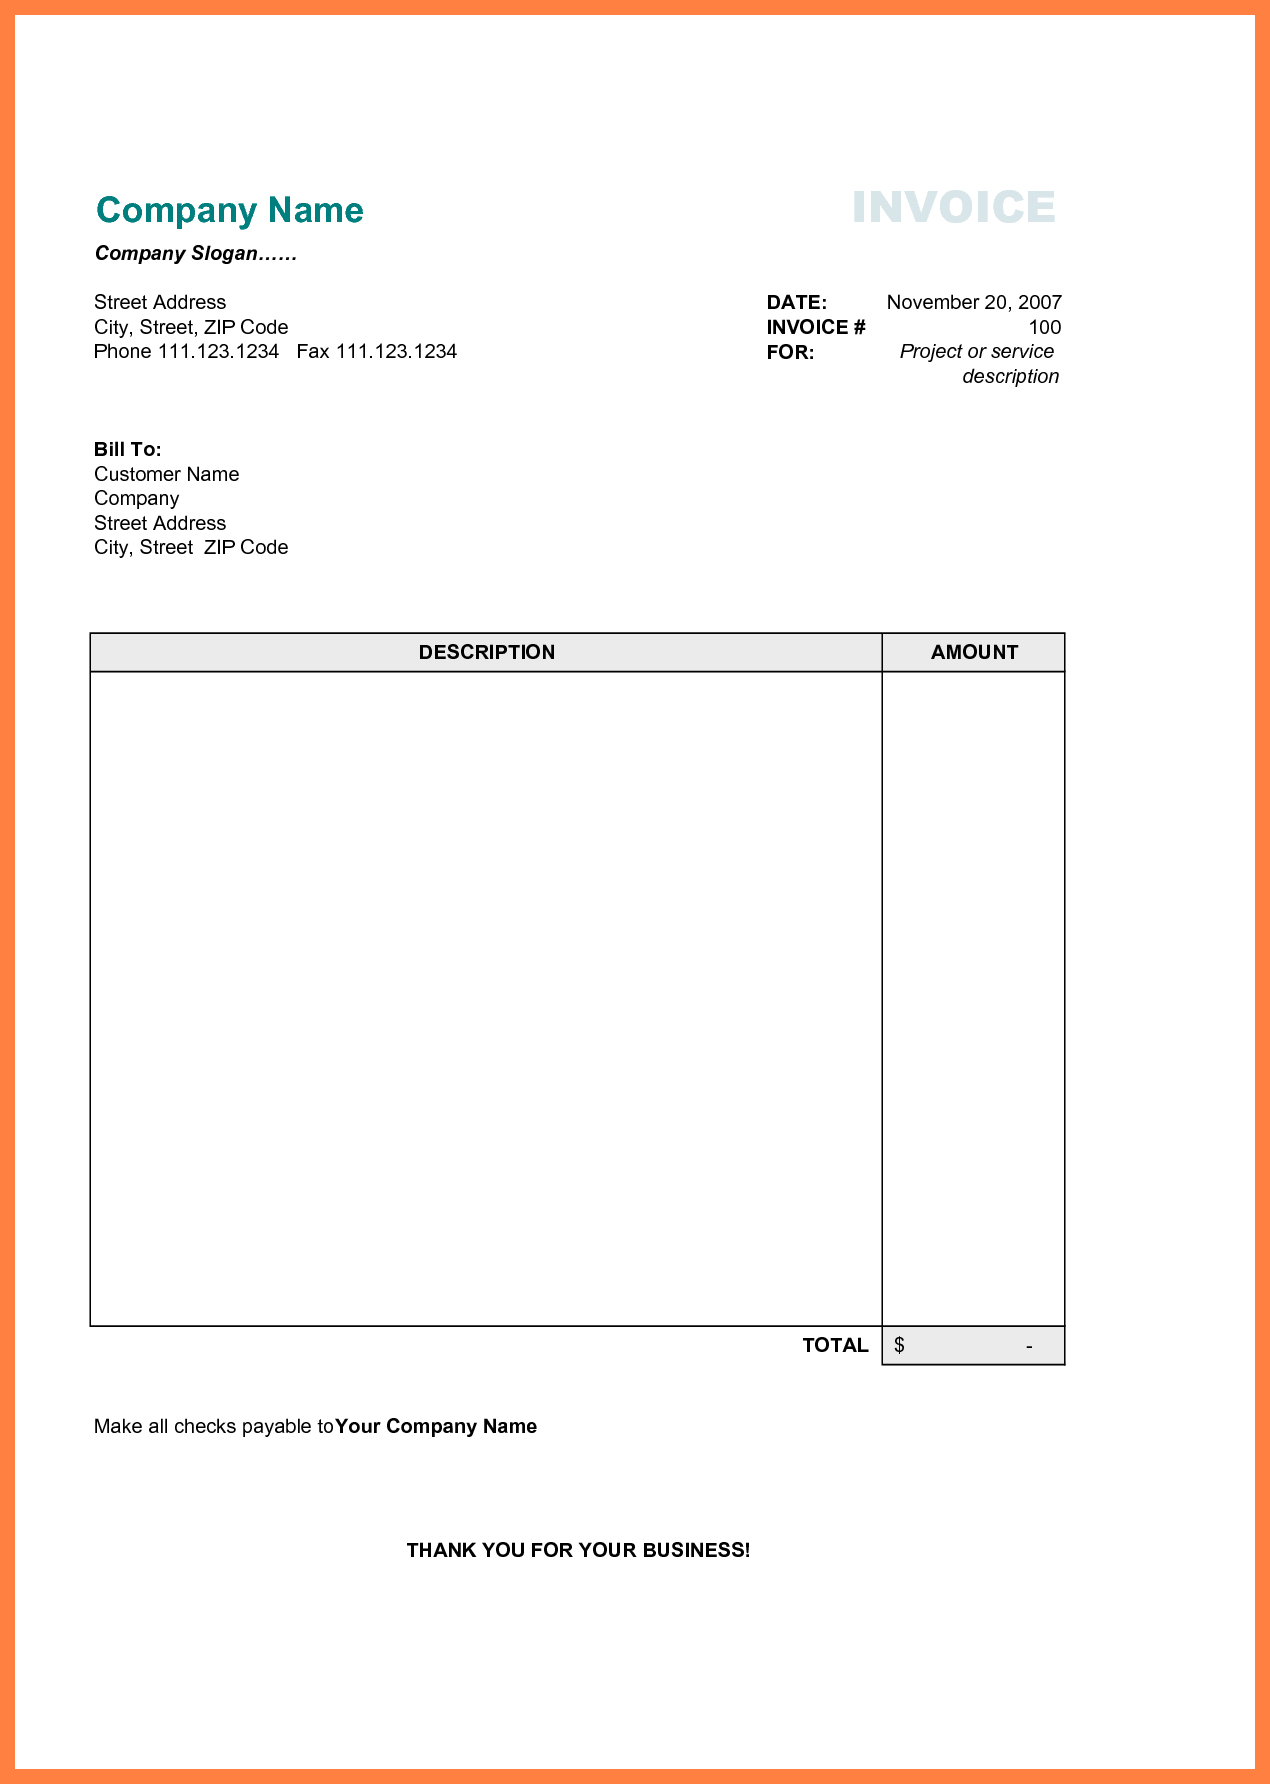 Free Printable Business Invoice Template - Invoice Format In For Free Printable Invoice Template Microsoft Word